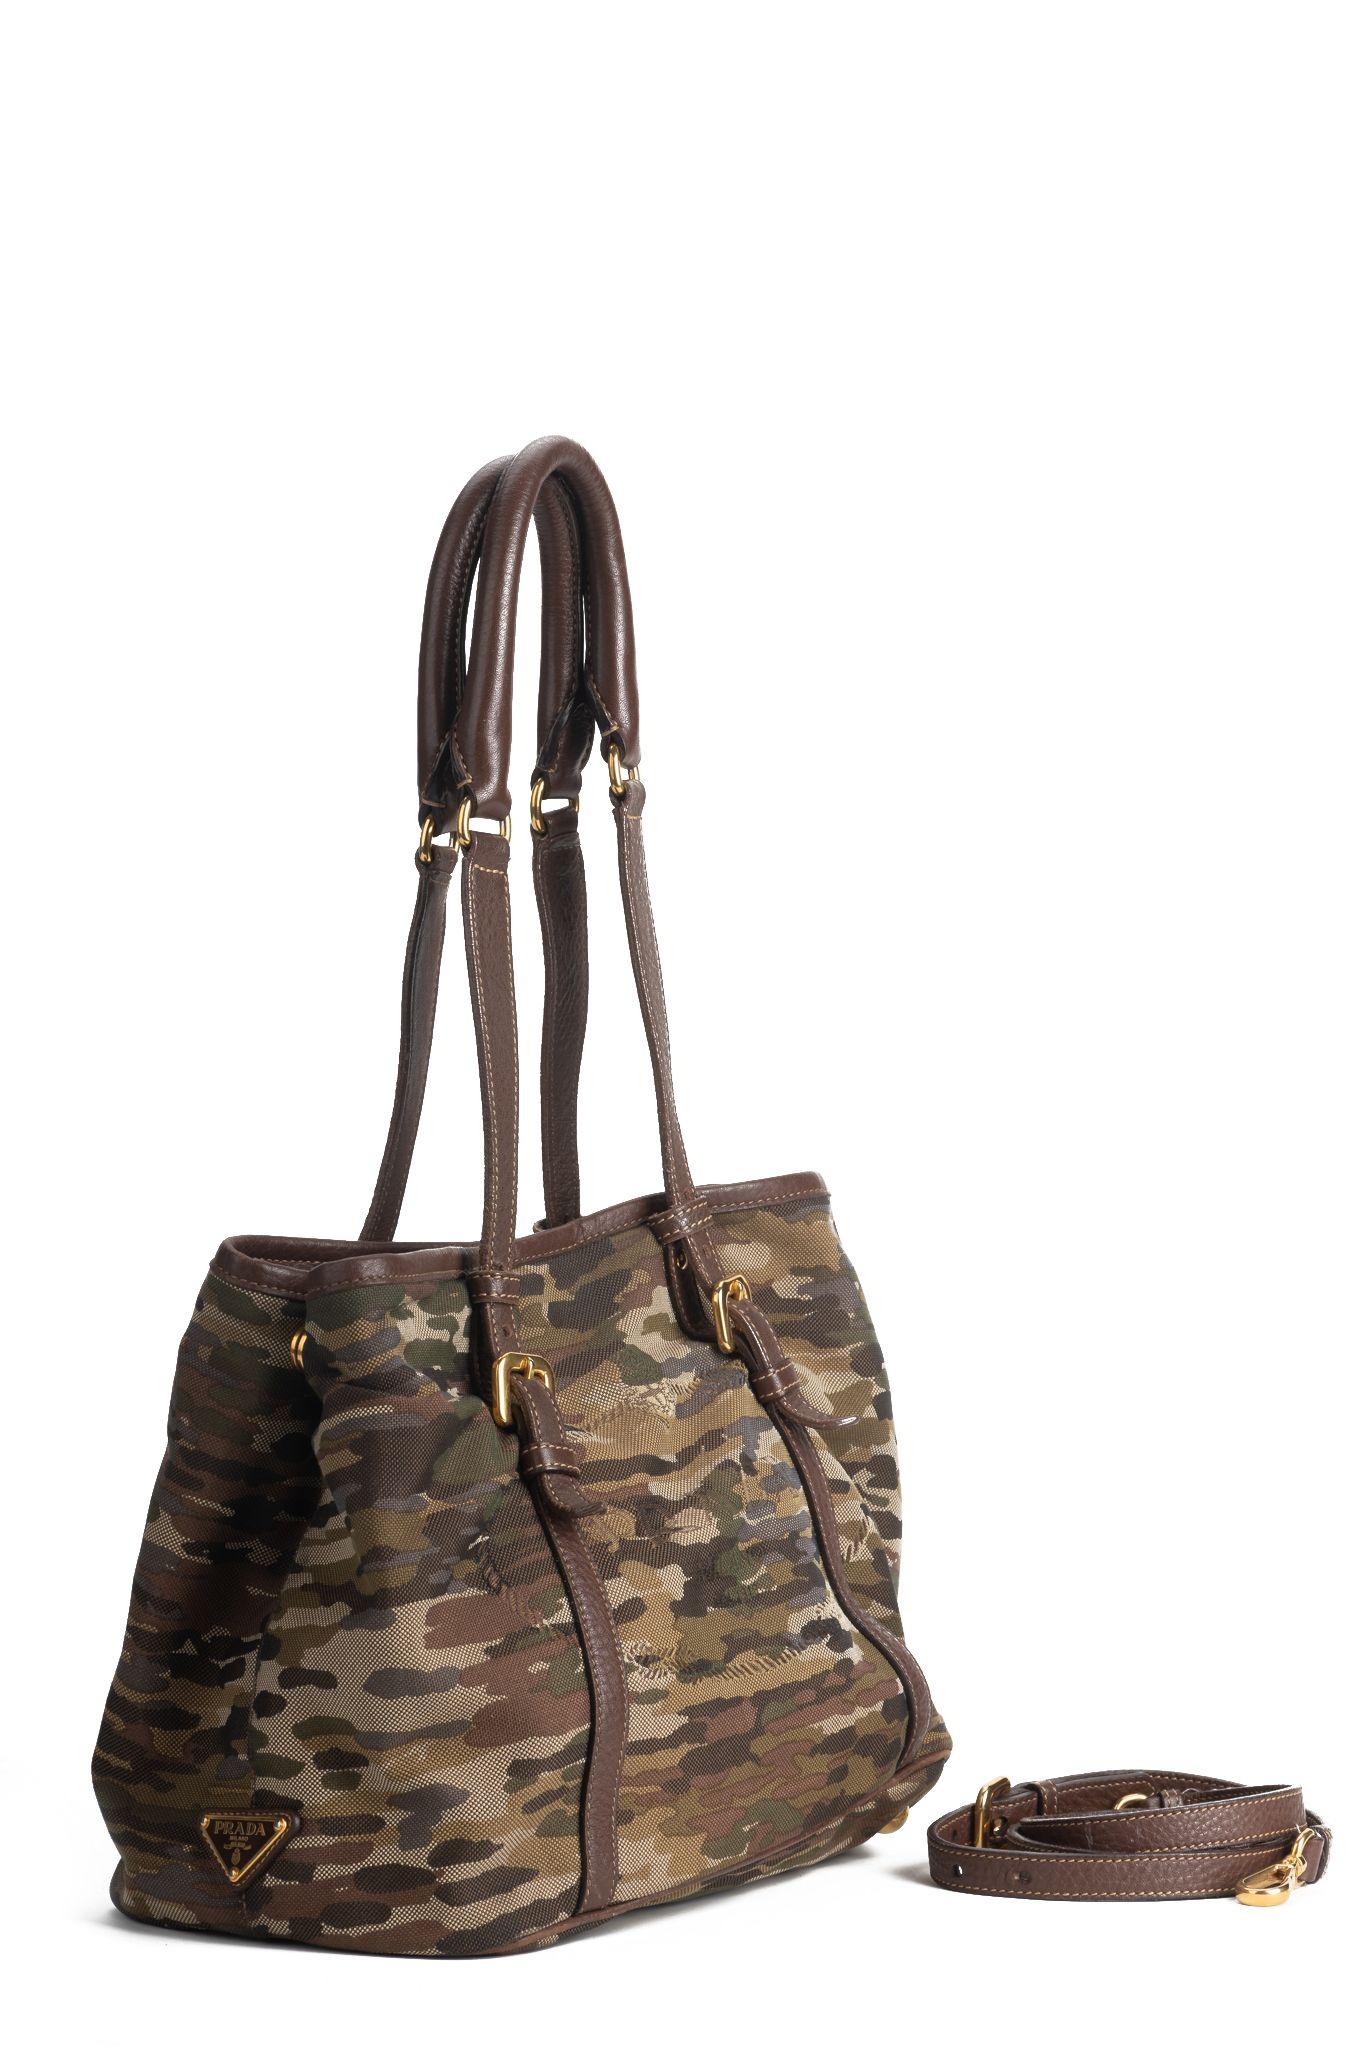 Prada military style tote bag. The bag has two large leather handles to wear it over the shoulder and comes also with a brown leather strap to wear it crossbody. The piece is made of fabric in a military pattern and trimmed with brown leather. The